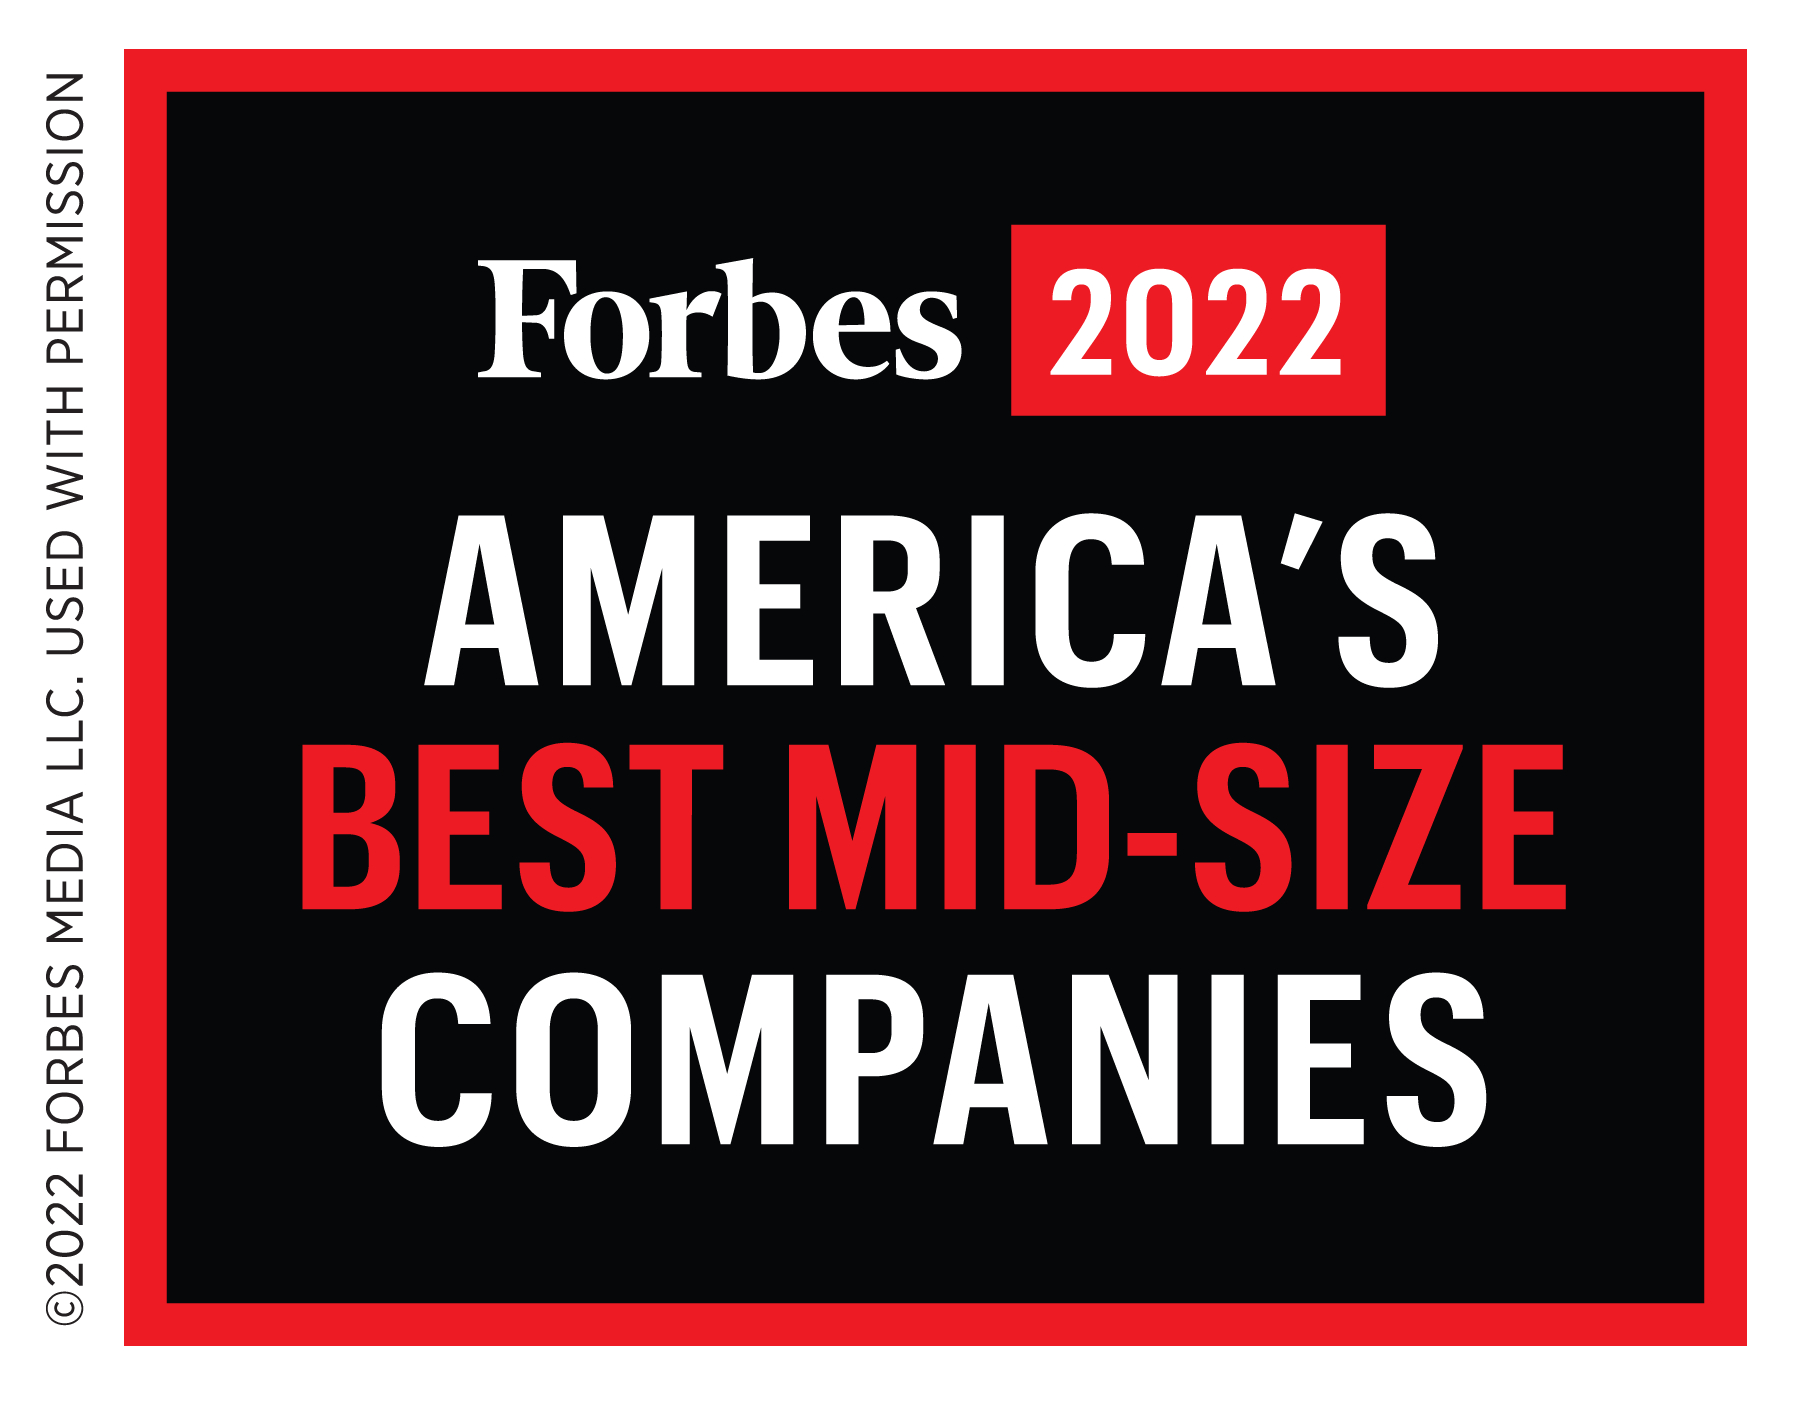 Littelfuse Named One of America’s Best MidSized Companies by Forbes